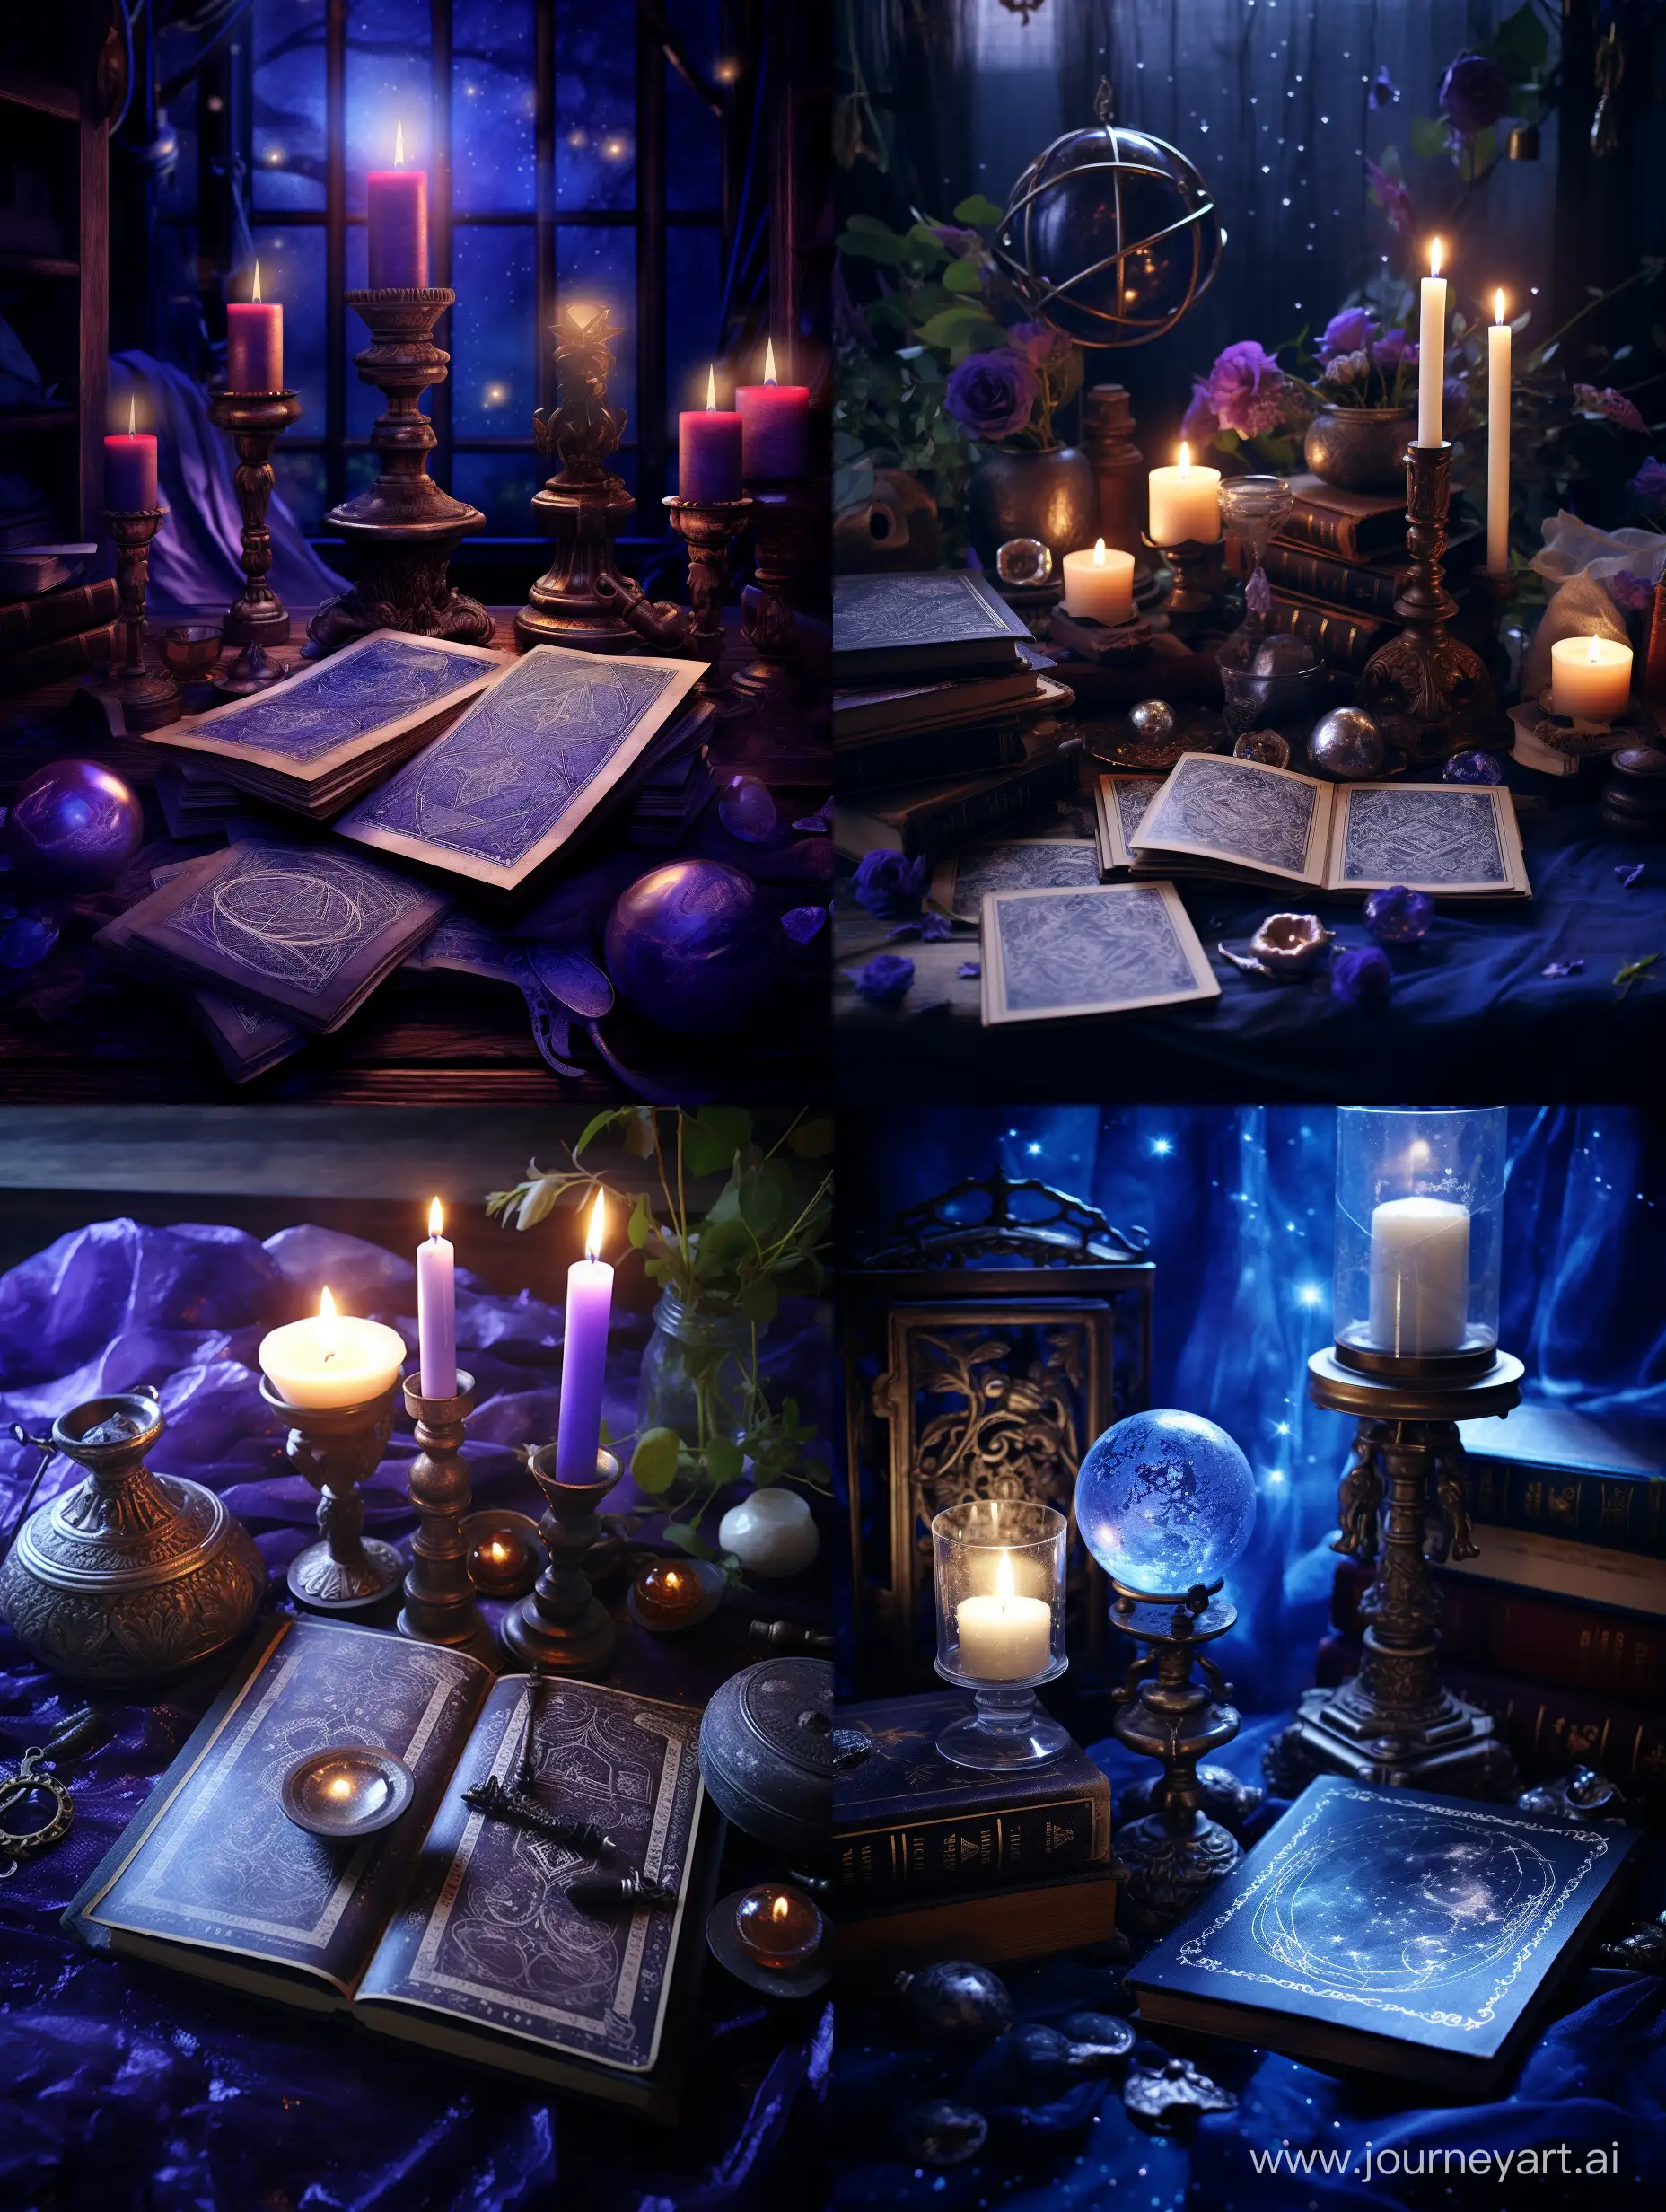 The subtle hues of the night sky shimmer into deep violet and indigo hues, making you feel as if you were under the vaults of a starry sky. A thin beam of light shines through the clouds, illuminating a Tarot deck spread out on an antique table.

The wood table, covered with a mysterious rune pattern, adds to the atmosphere of magic and antiquity. Each card rests on the table, like a bridge between the world of reality and the mysterious world of symbols and archetypes.

The backdrop is complemented by elements of nature: branches of woody trees fringed with candles create a cozy and inspiring atmosphere. The magic of the place is emphasized by the light flickering of the candles, which gives the background an incredible depth and mystery.

This painting combines a sense of antiquity, mysticism and inspiration Photo with flash, taken on a Kodak Portra. Small vignette